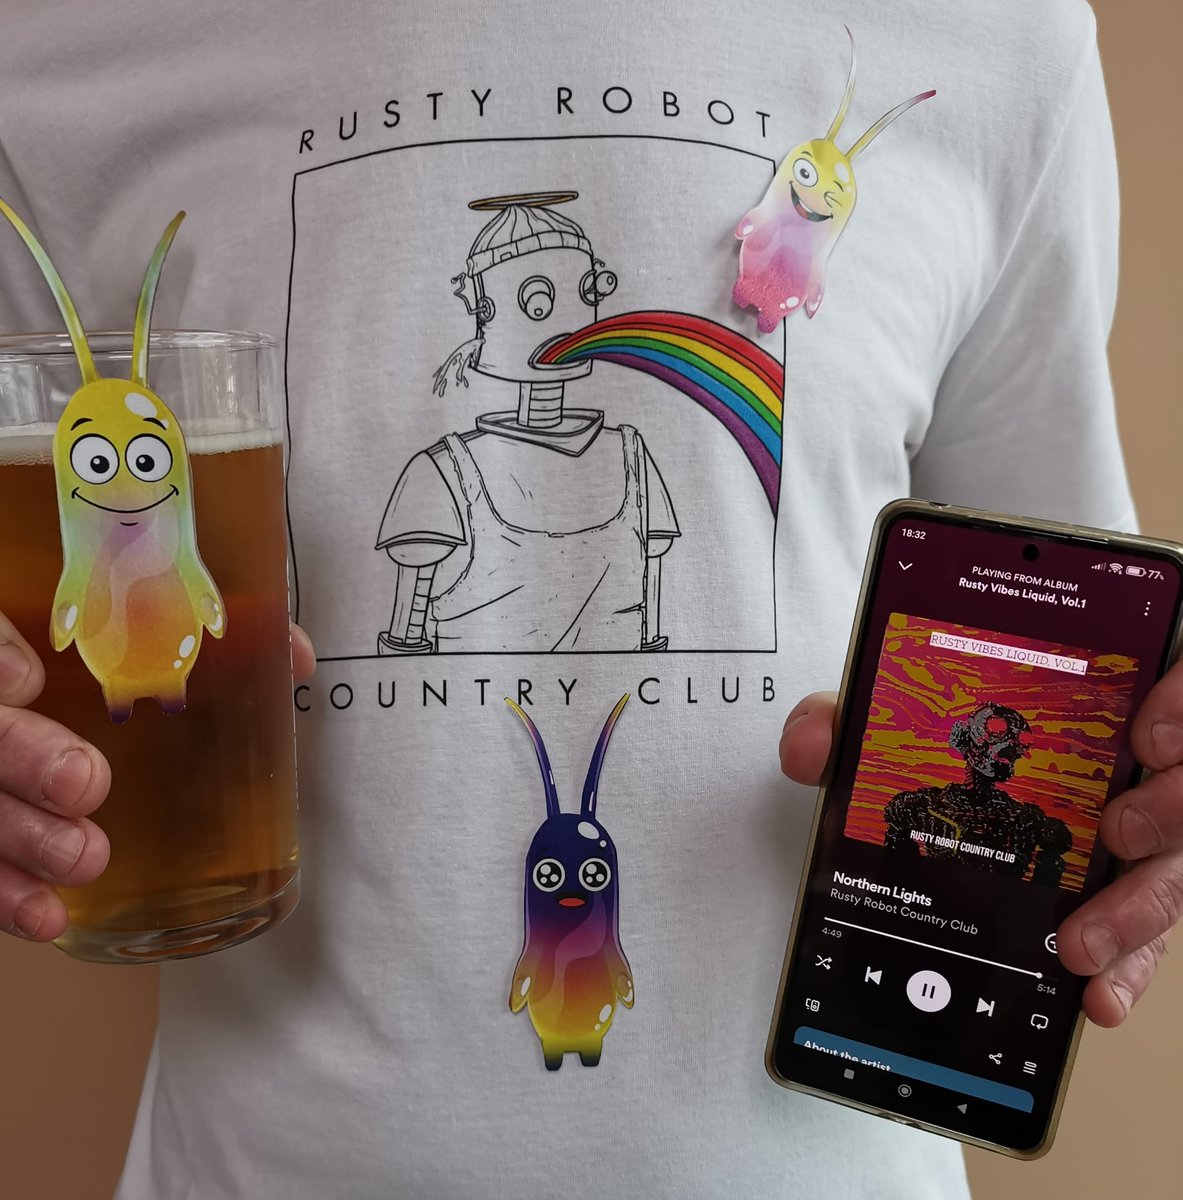 Me and my #LUMI frens, chilling out with a 🍺 and some #RRCC vibes on #SpotifyPremium from my favourite #ShimmerEVM project @RustyRobotCC. Also checkout the Limited Edition OG Tee 😍
@MagicSeaDEX #IOTA